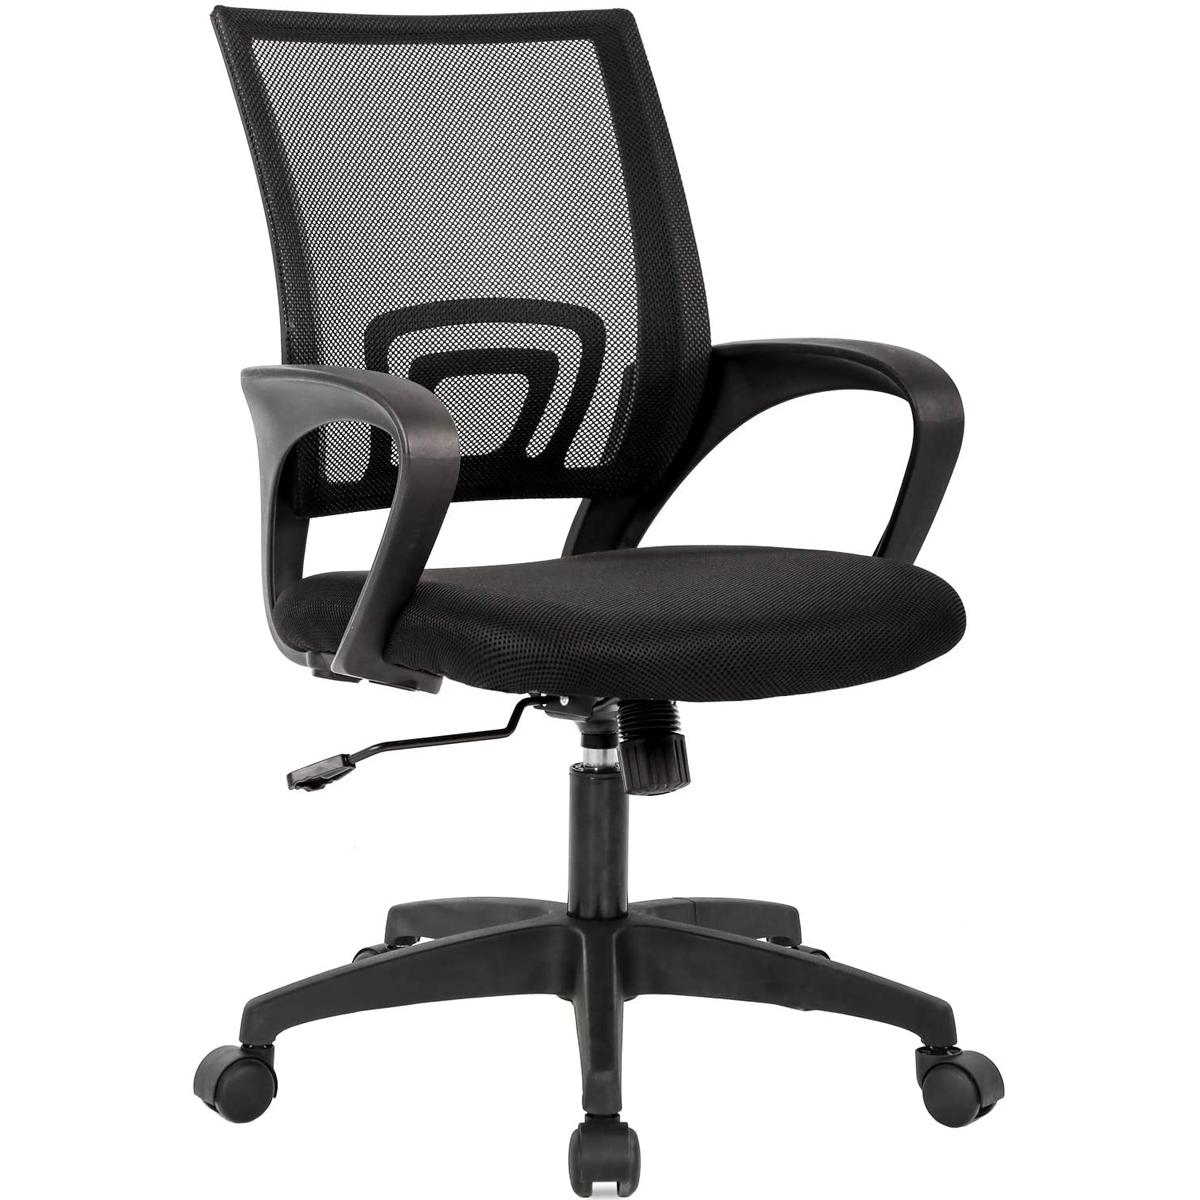 Home Office Chair Ergonomic Desk Chair Mesh Computer Chair for $39.99 Shipped